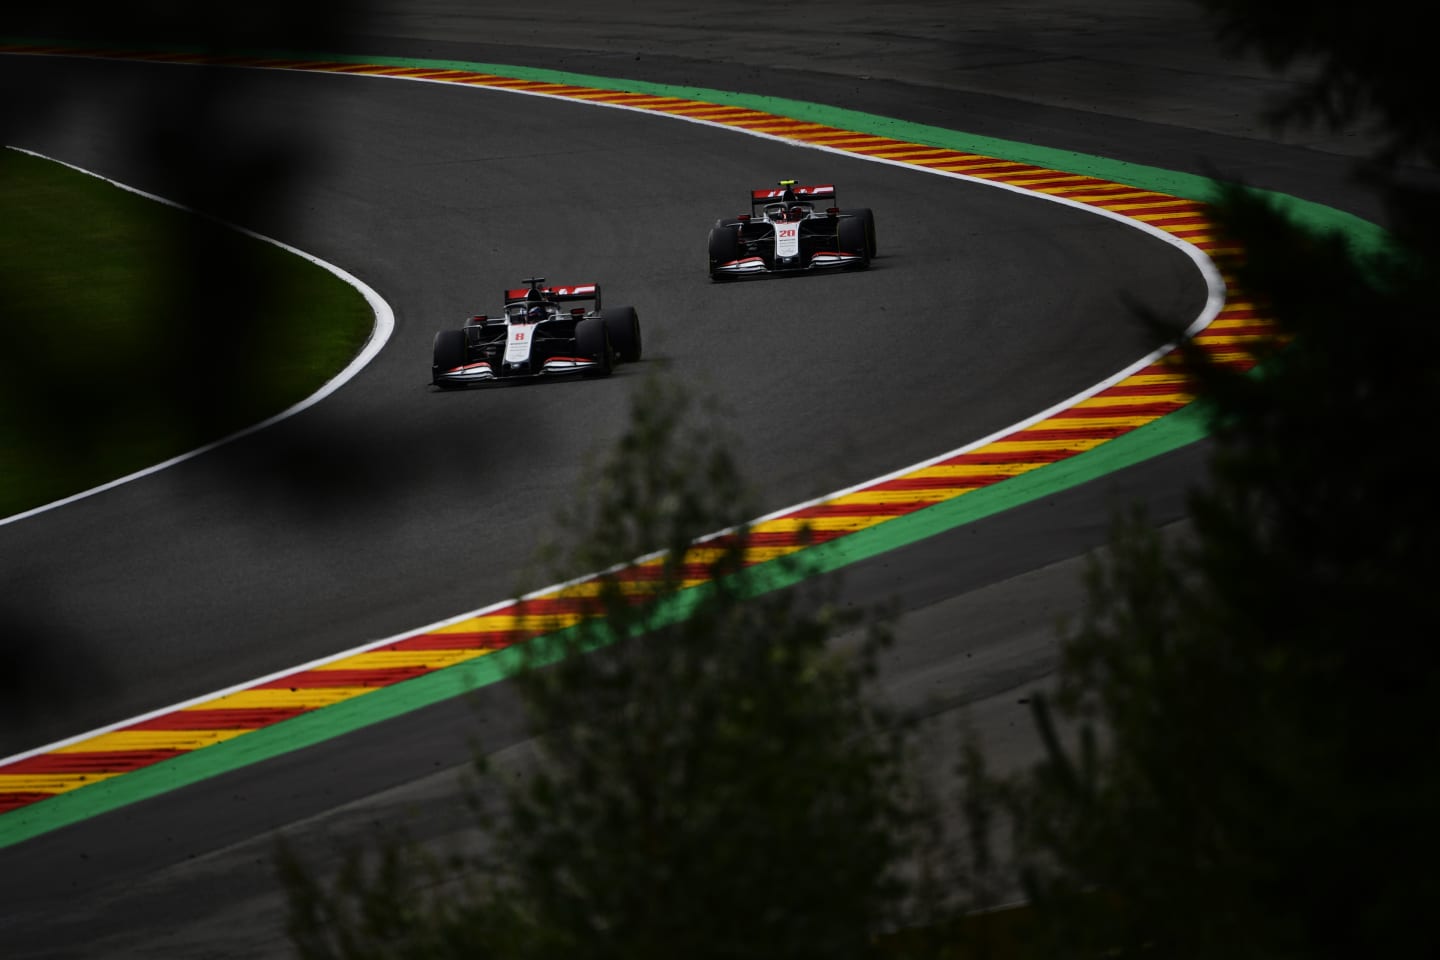 SPA, BELGIUM - AUGUST 29: Romain Grosjean of France driving the (8) Haas F1 Team VF-20 Ferrari leads Kevin Magnussen of Denmark driving the (20) Haas F1 Team VF-20 Ferrari during final practice for the F1 Grand Prix of Belgium at Circuit de Spa-Francorchamps on August 29, 2020 in Spa, Belgium. (Photo by John Thuys/Pool via Getty Images)